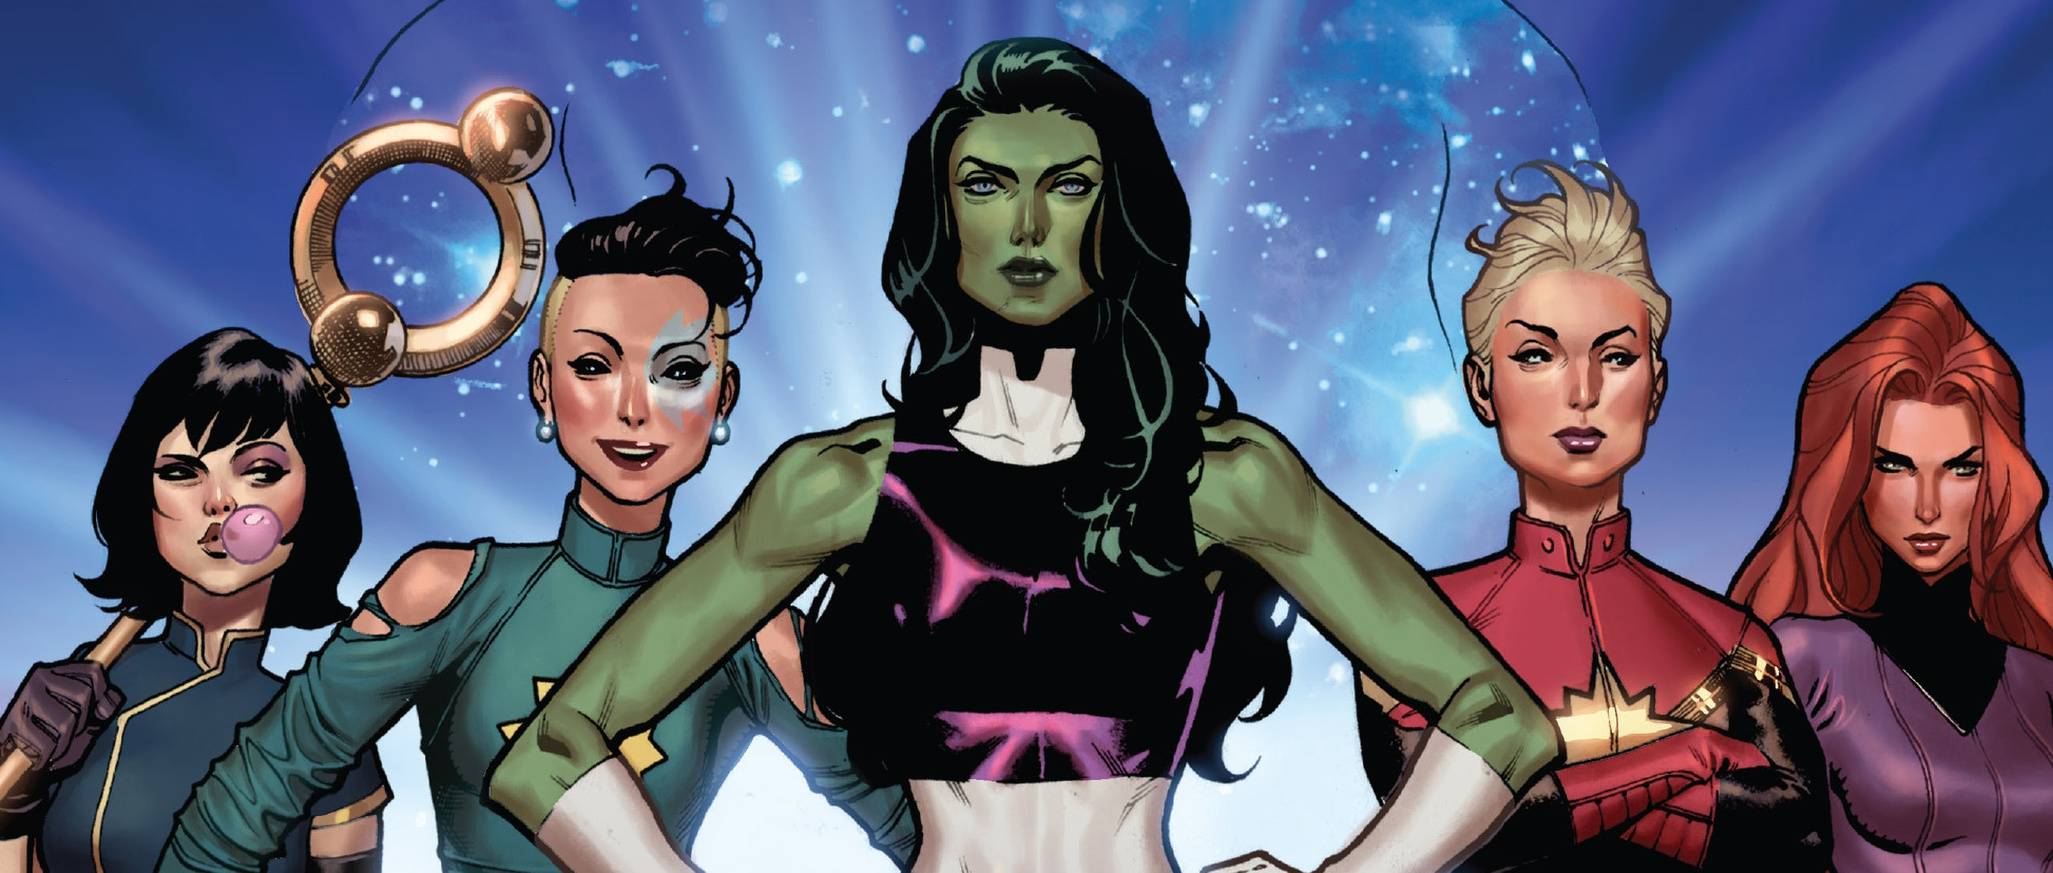 She-Hulk and A-Force in Marvel Comics